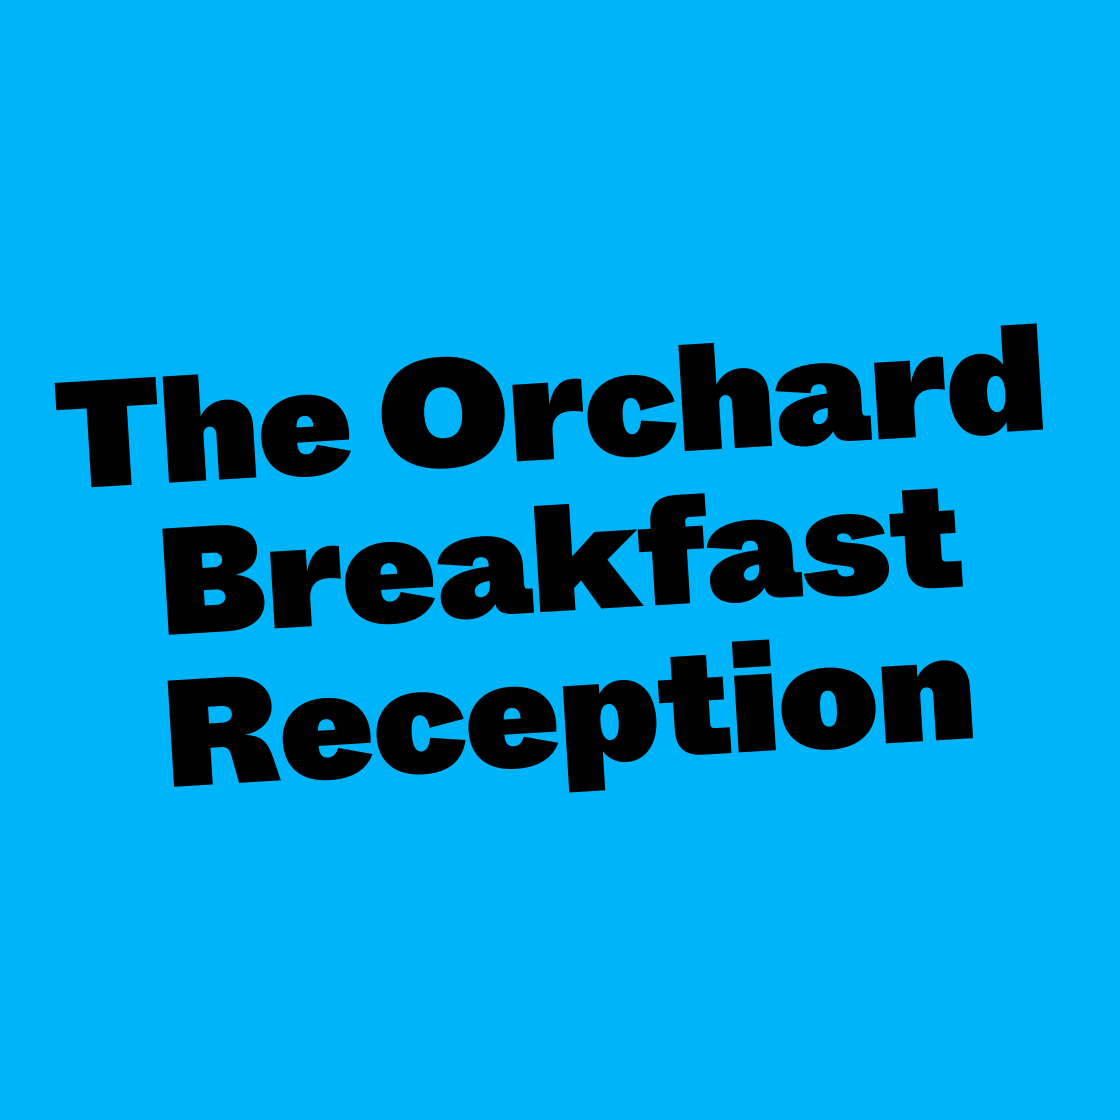 The Orchard Breakfast Reception